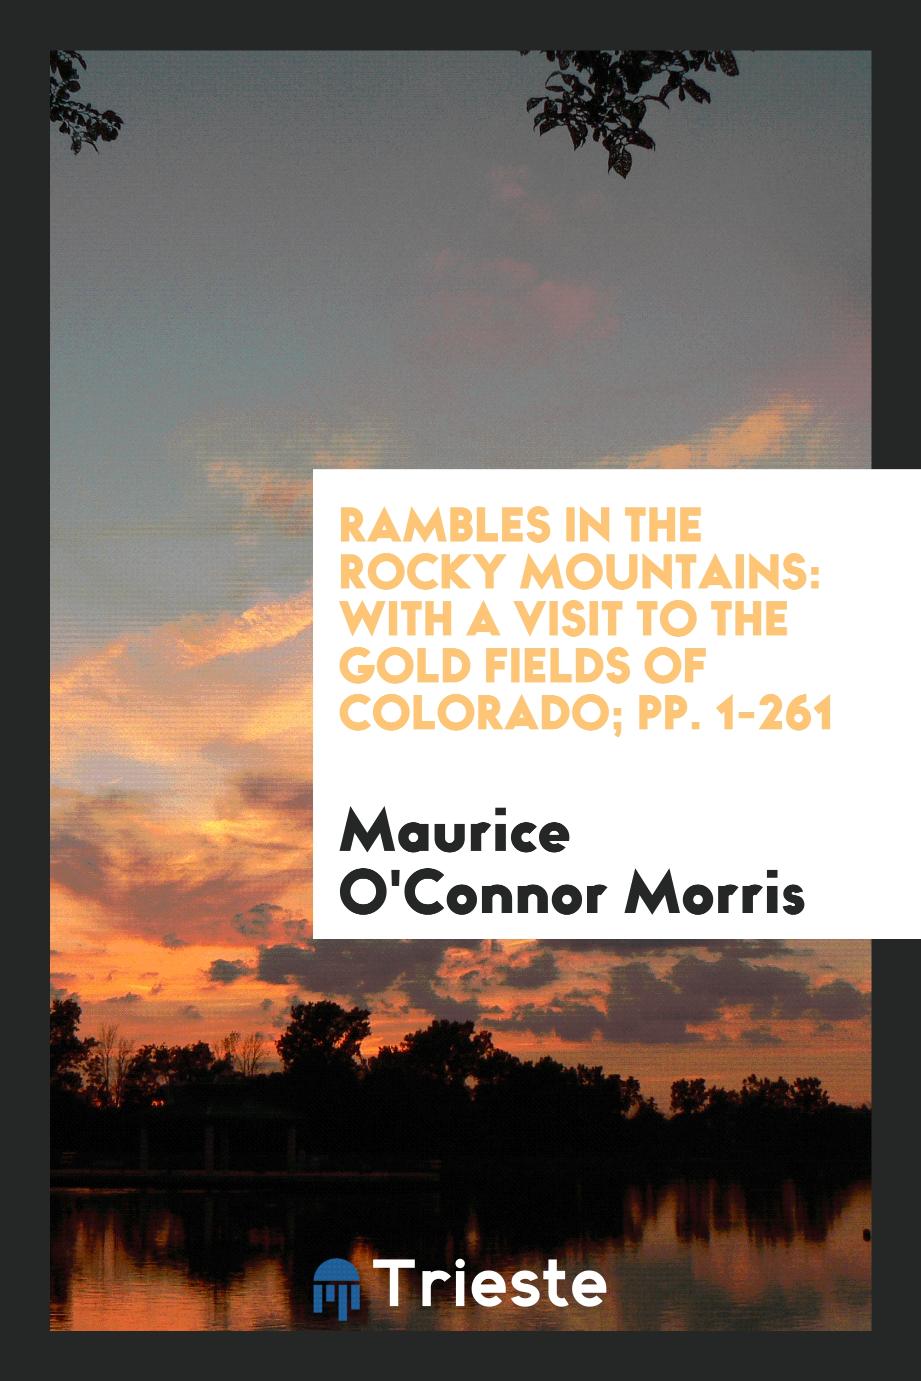 Rambles in the Rocky Mountains: With a Visit to the Gold Fields of Colorado; pp. 1-261